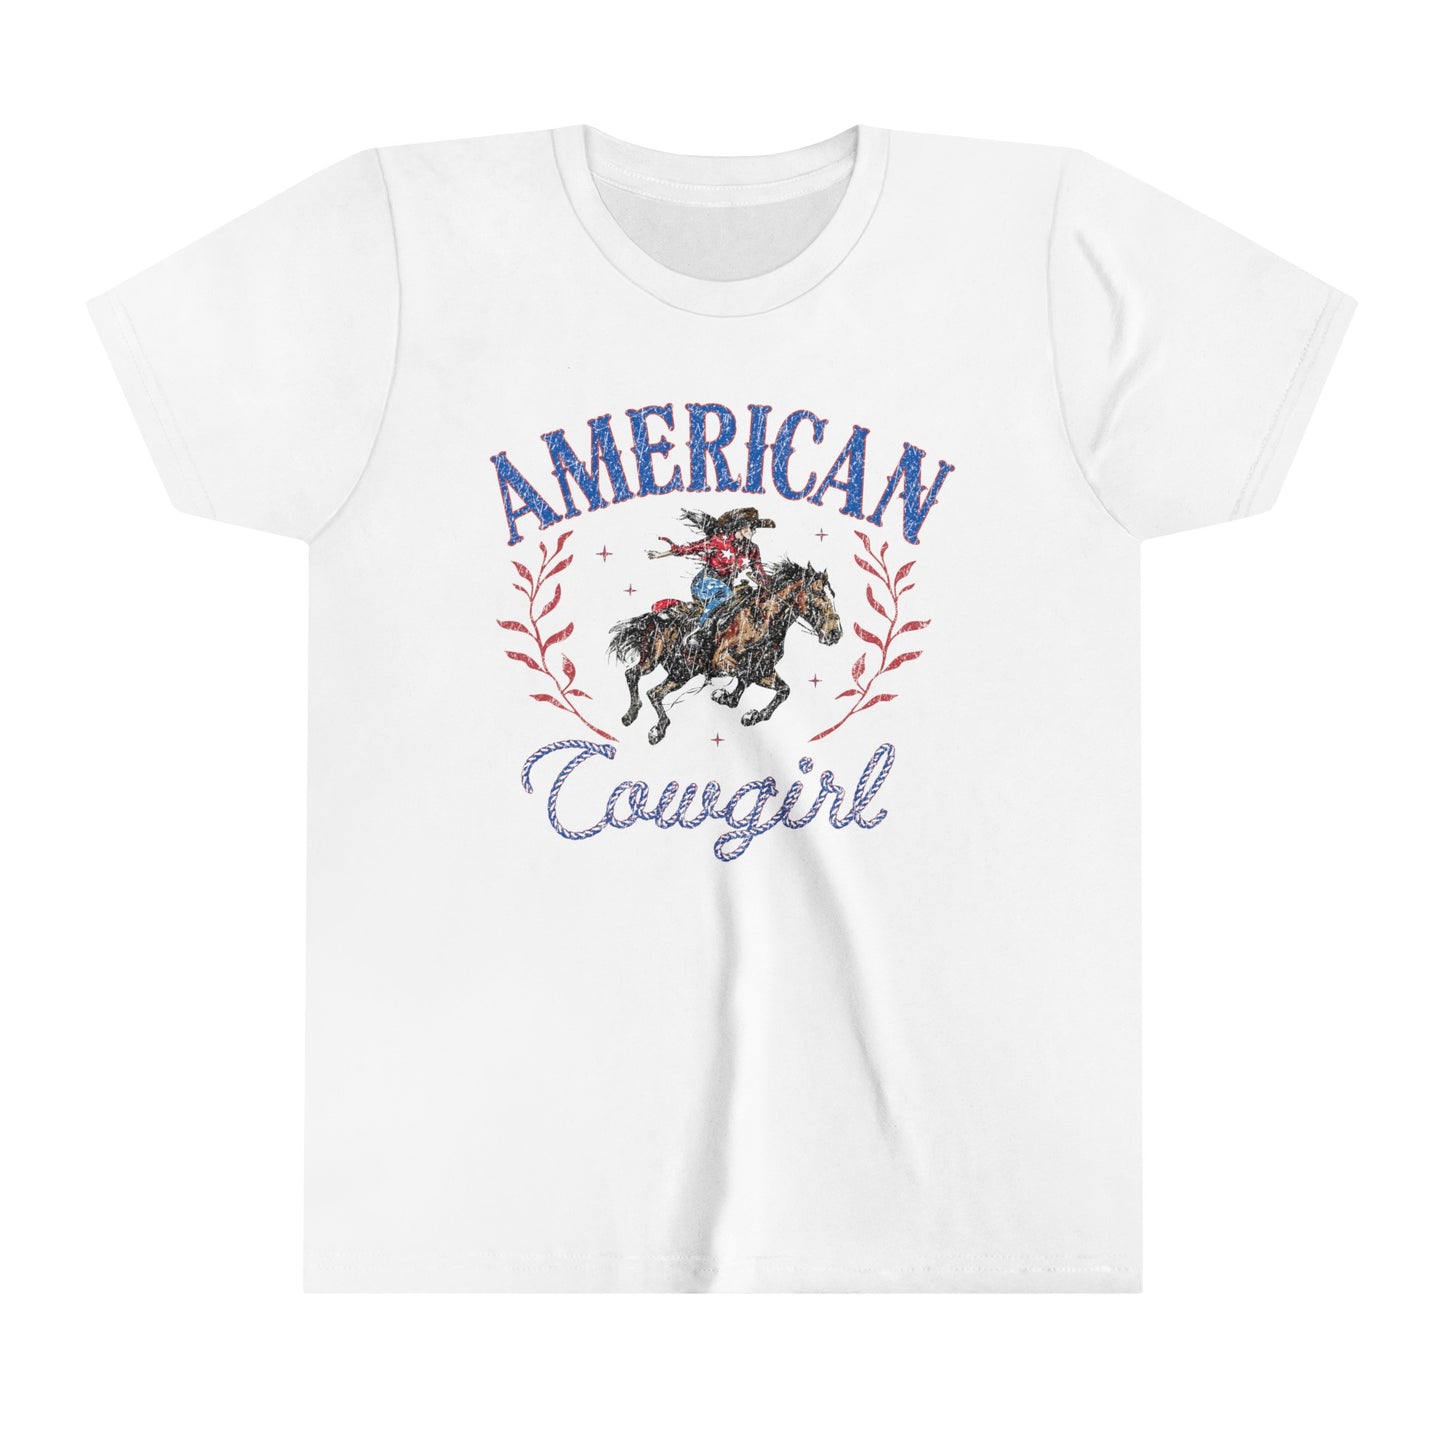 American Cowgirl Girl's Youth Shirt